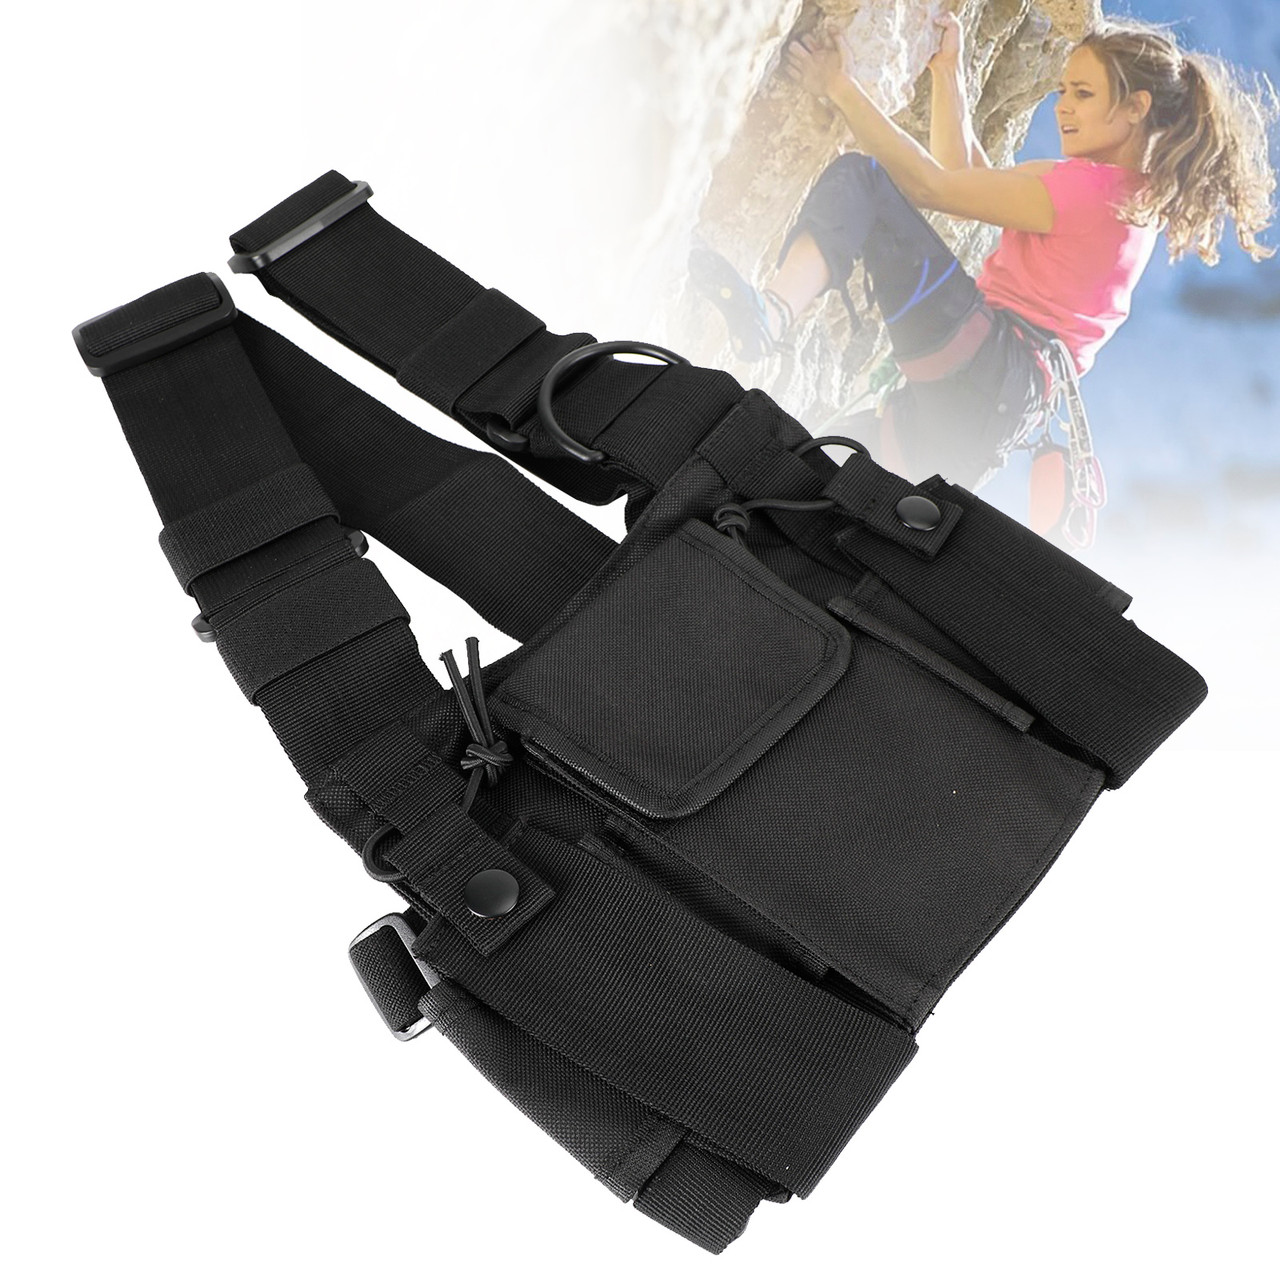 Tactical Multifunctional Chest Harness Bag for Field Operations Radio Black